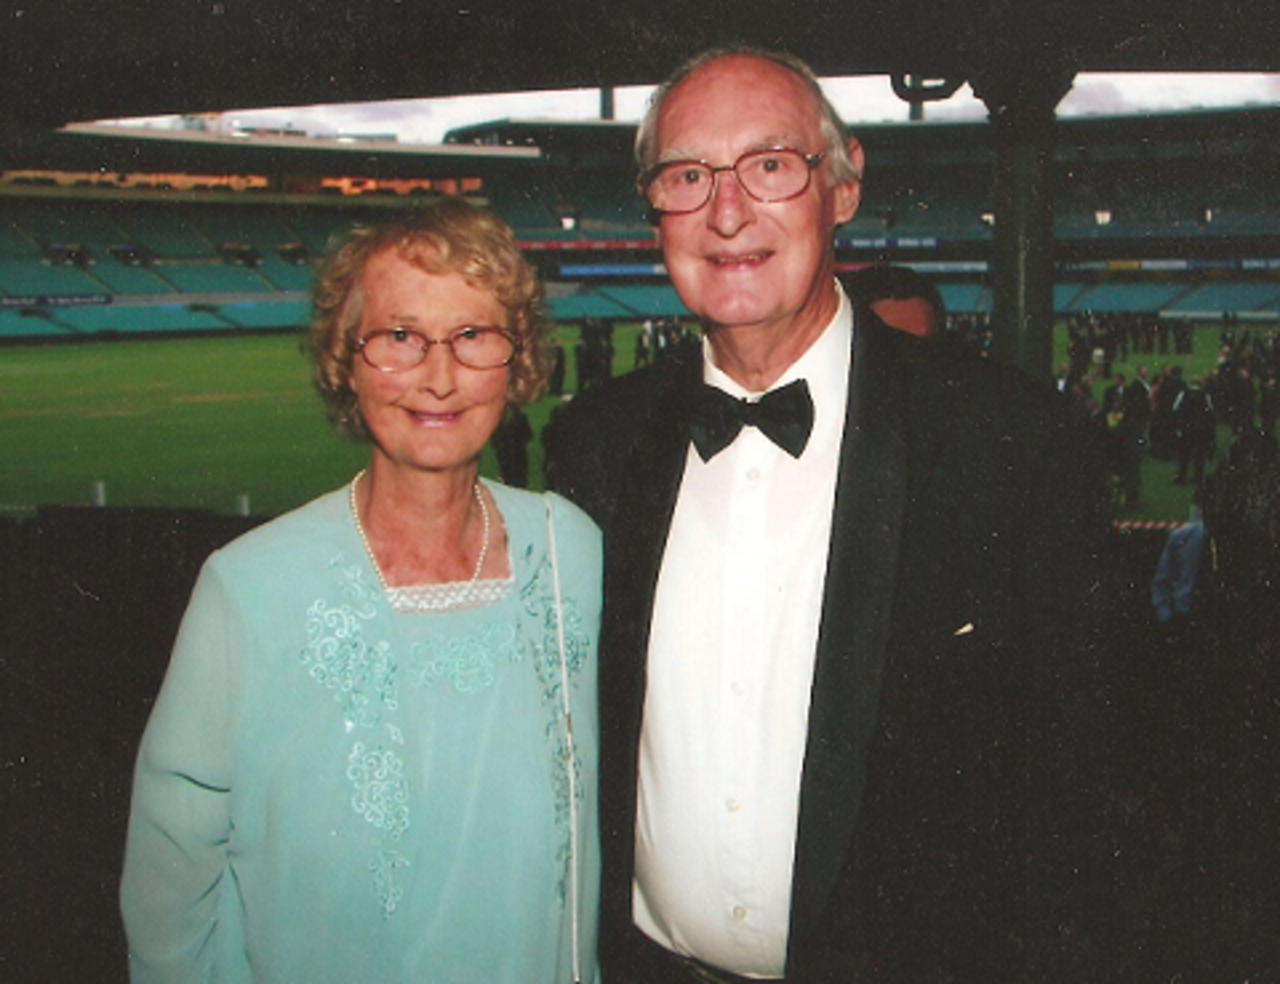 File photo: Brian and Judy Booth at the SCG